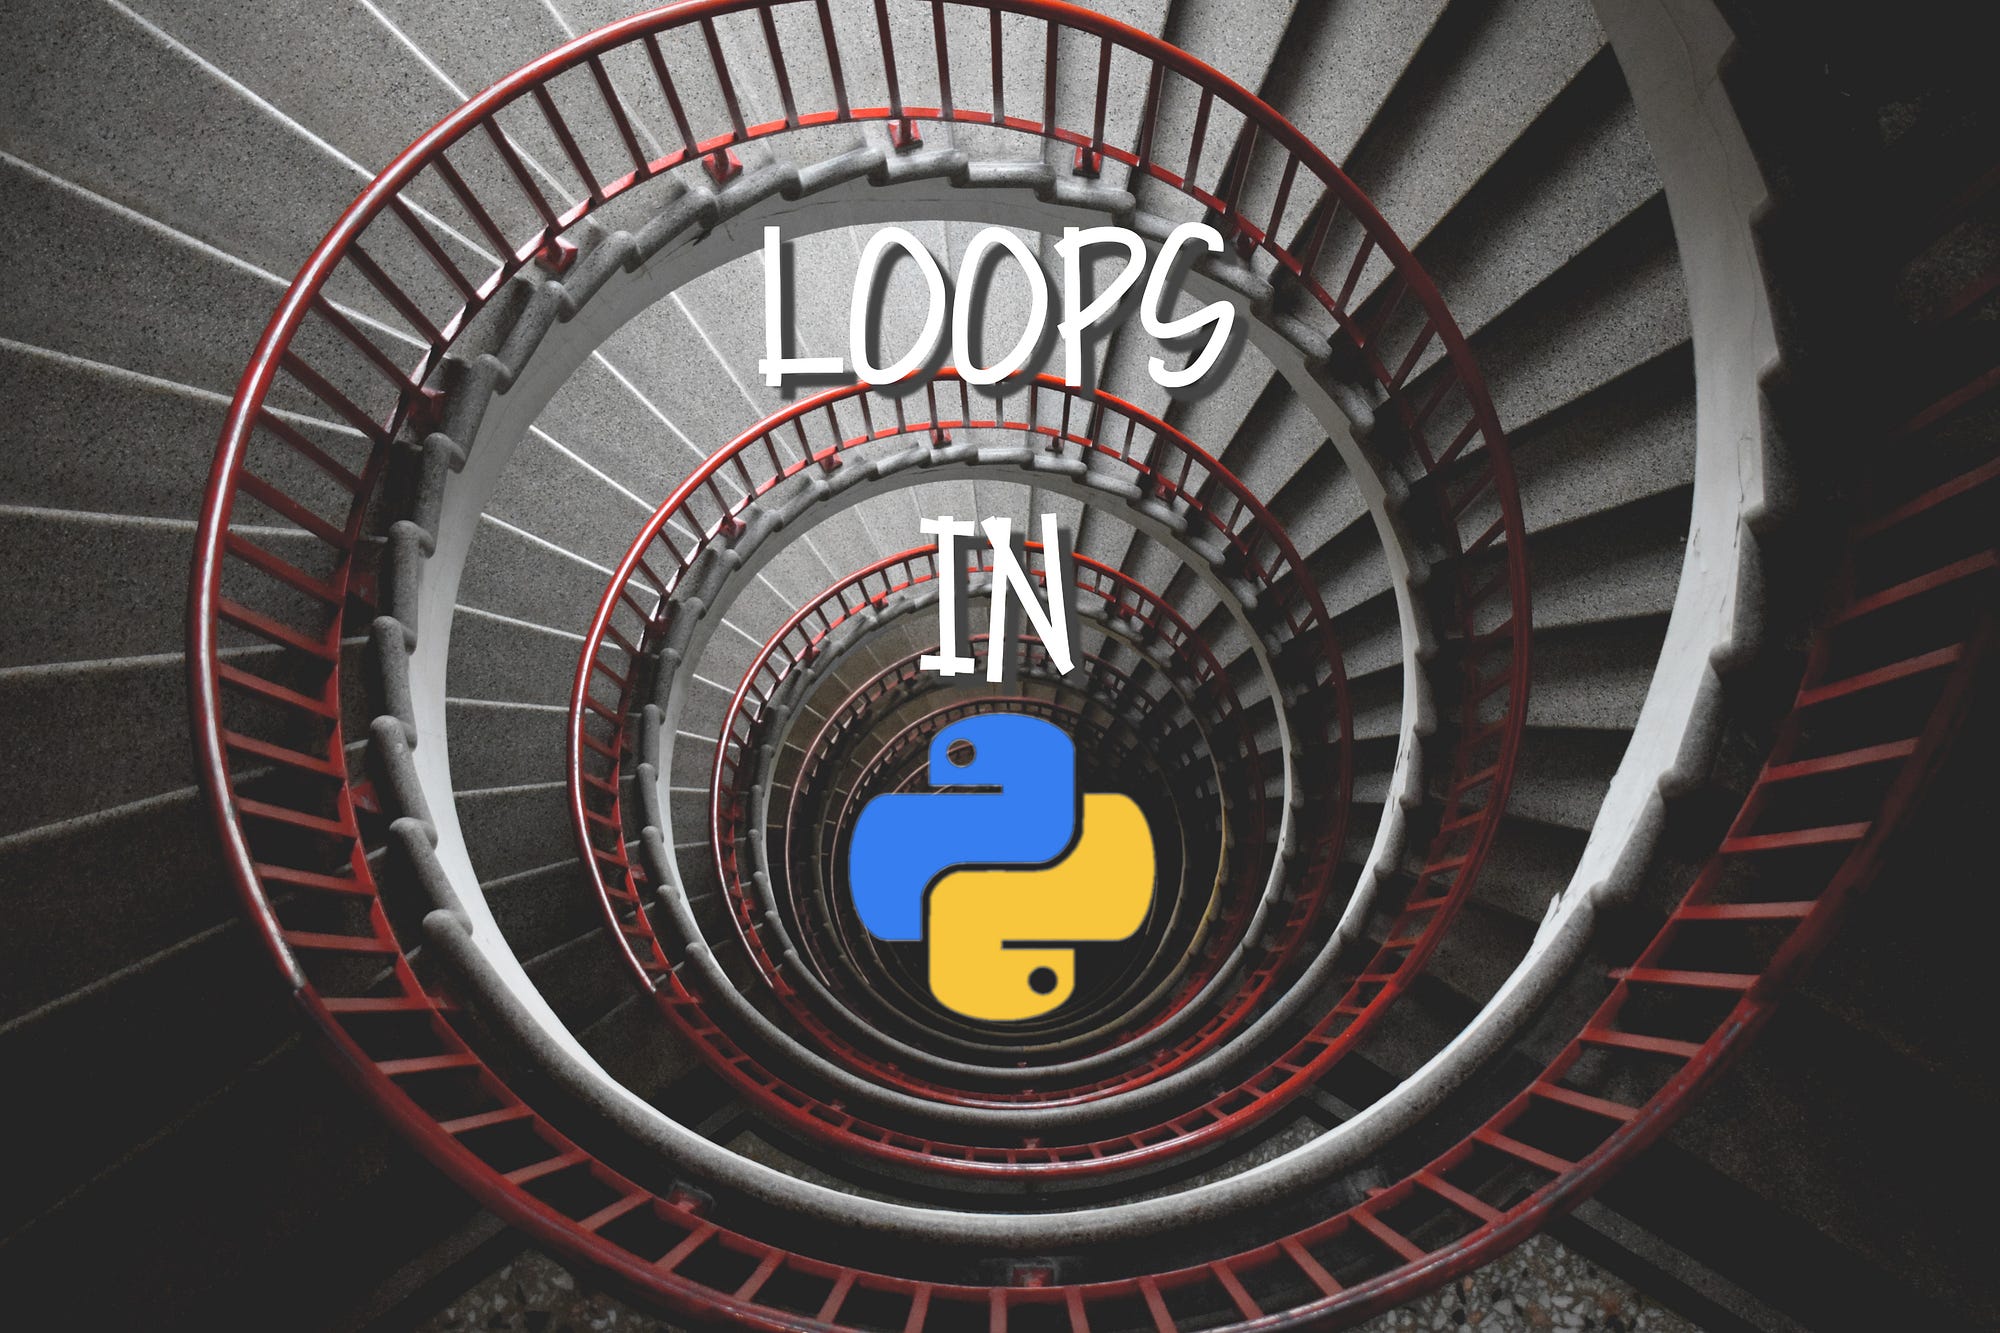 How To Make Use Of Loops In Python, by Lazar Gugleta